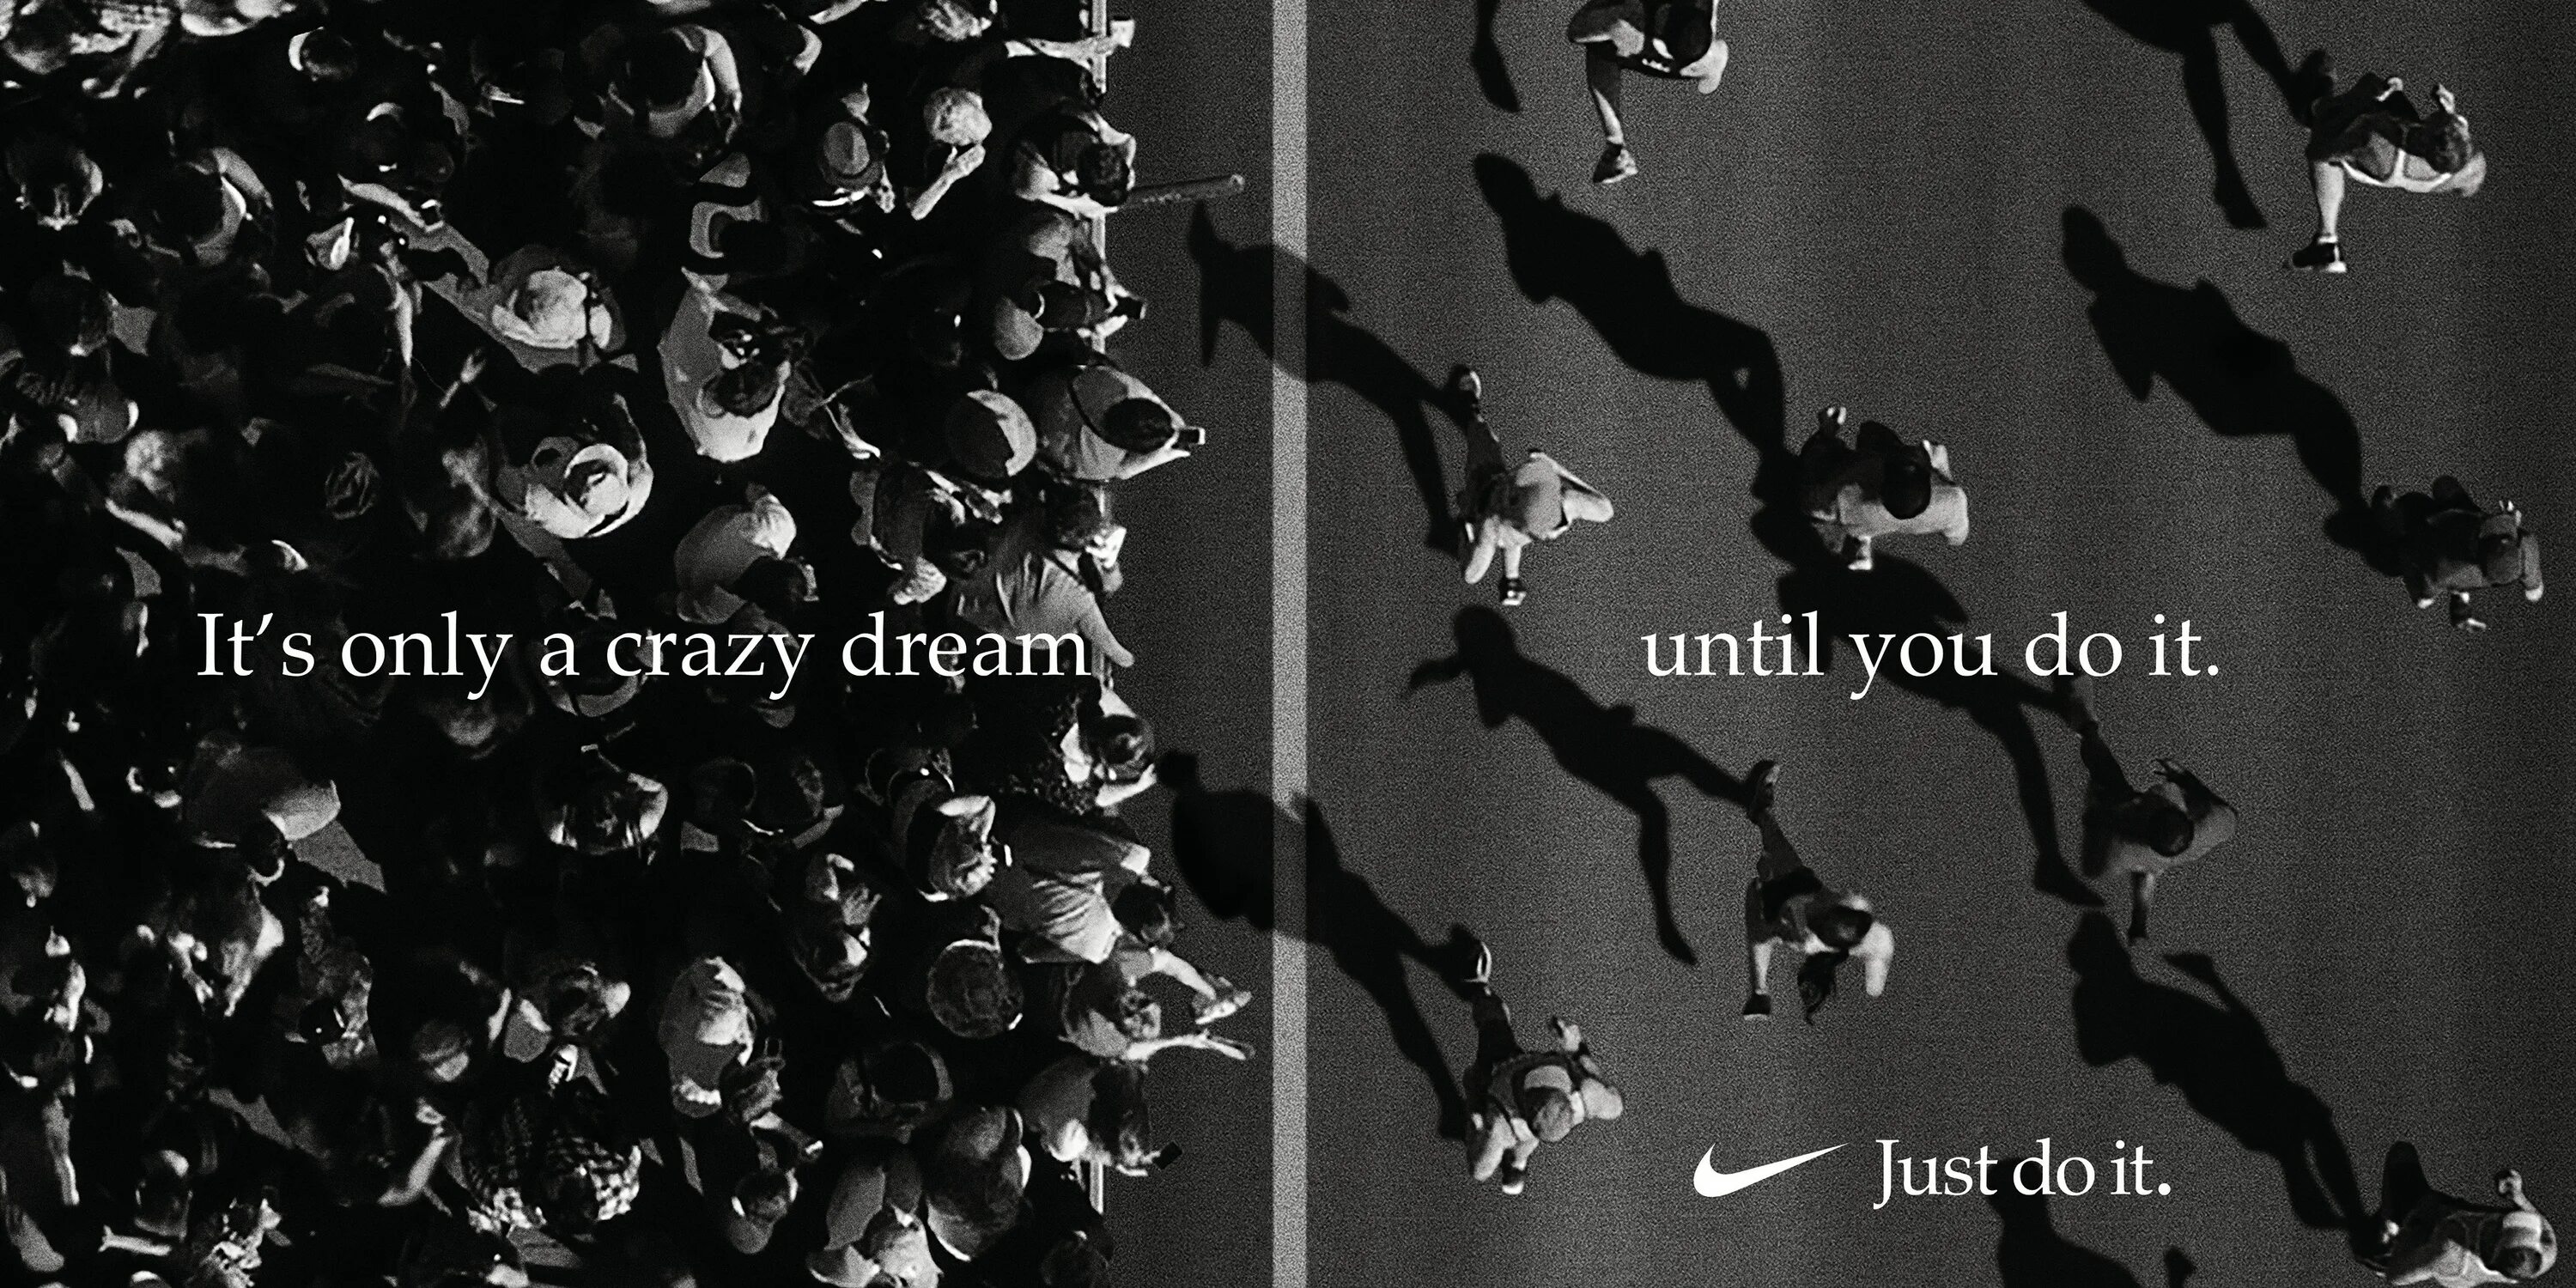 It s only just. Nike Dream Crazy. Nike Dream Crazy реклама. Nike Dream Crazier. Nike's "Dream Crazy".